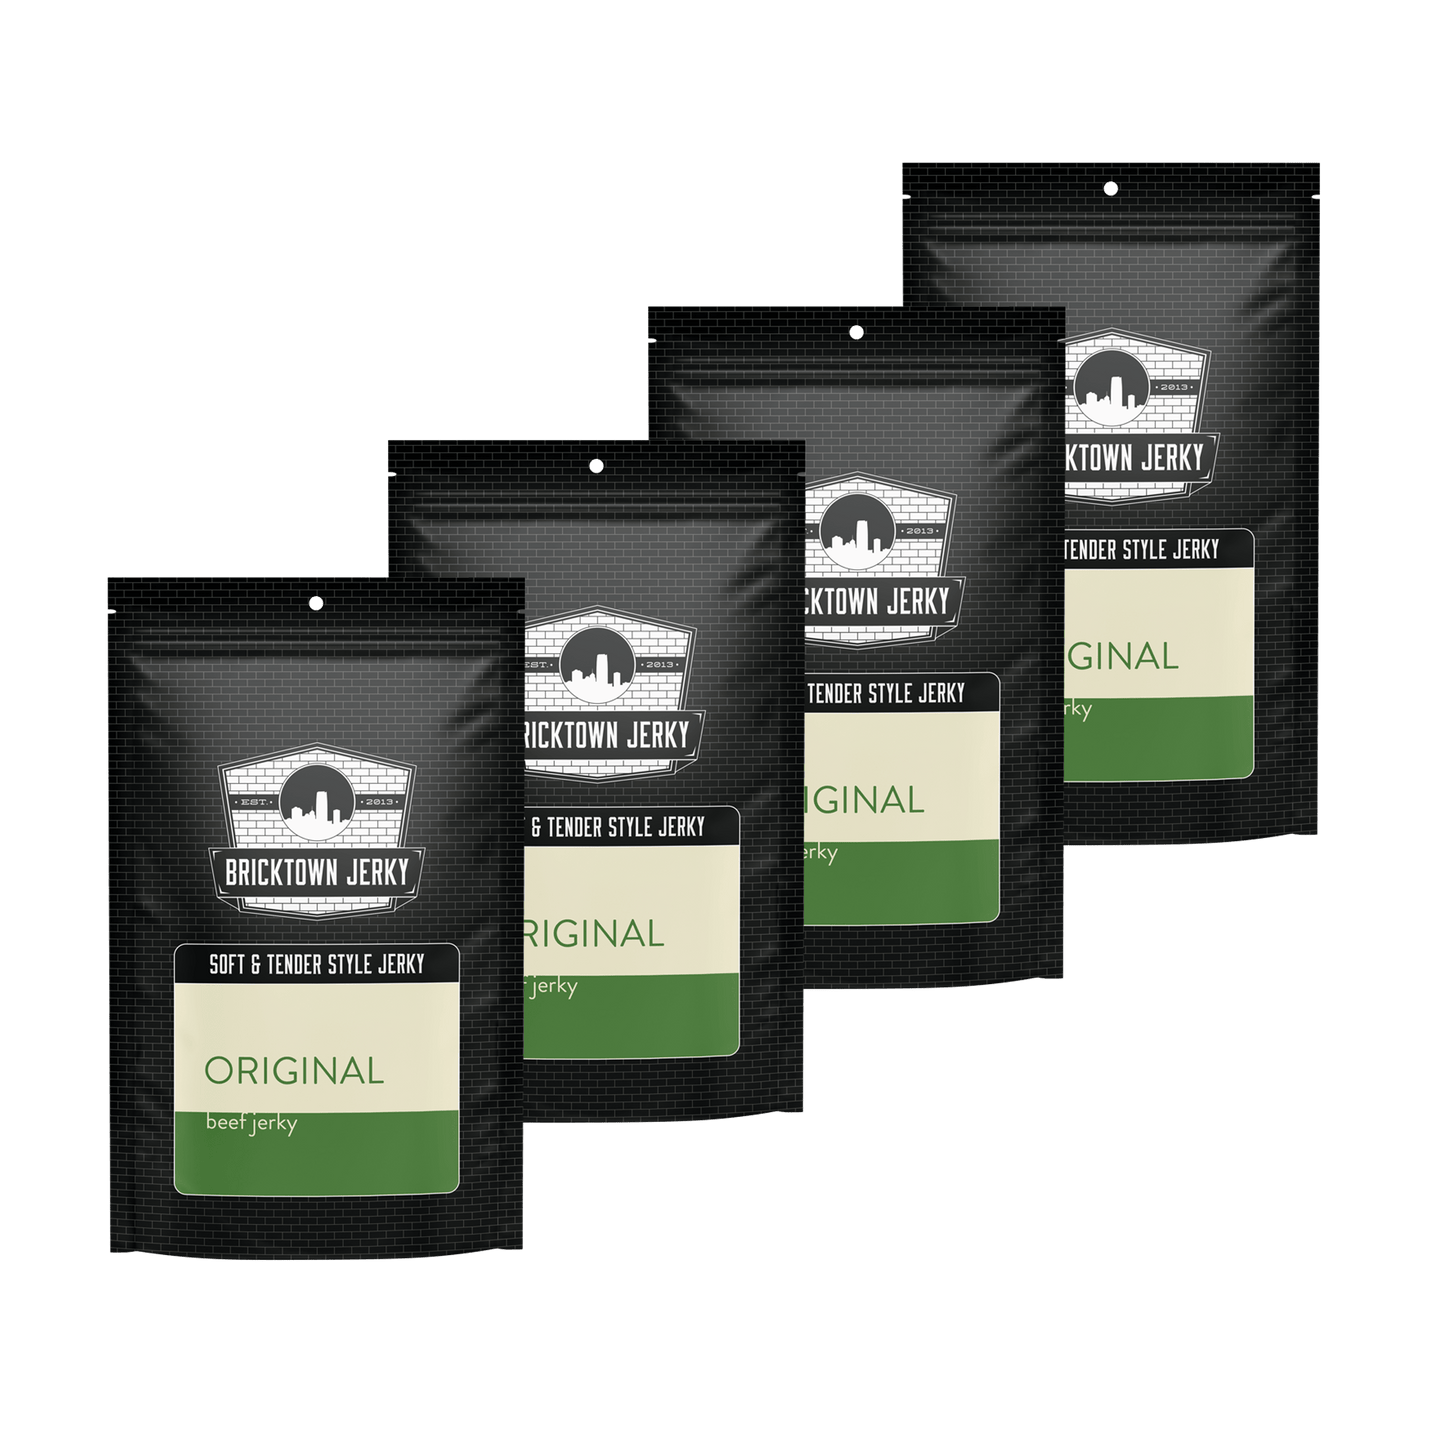 Soft and Tender Style Beef Jerky - Original by Bricktown Jerky